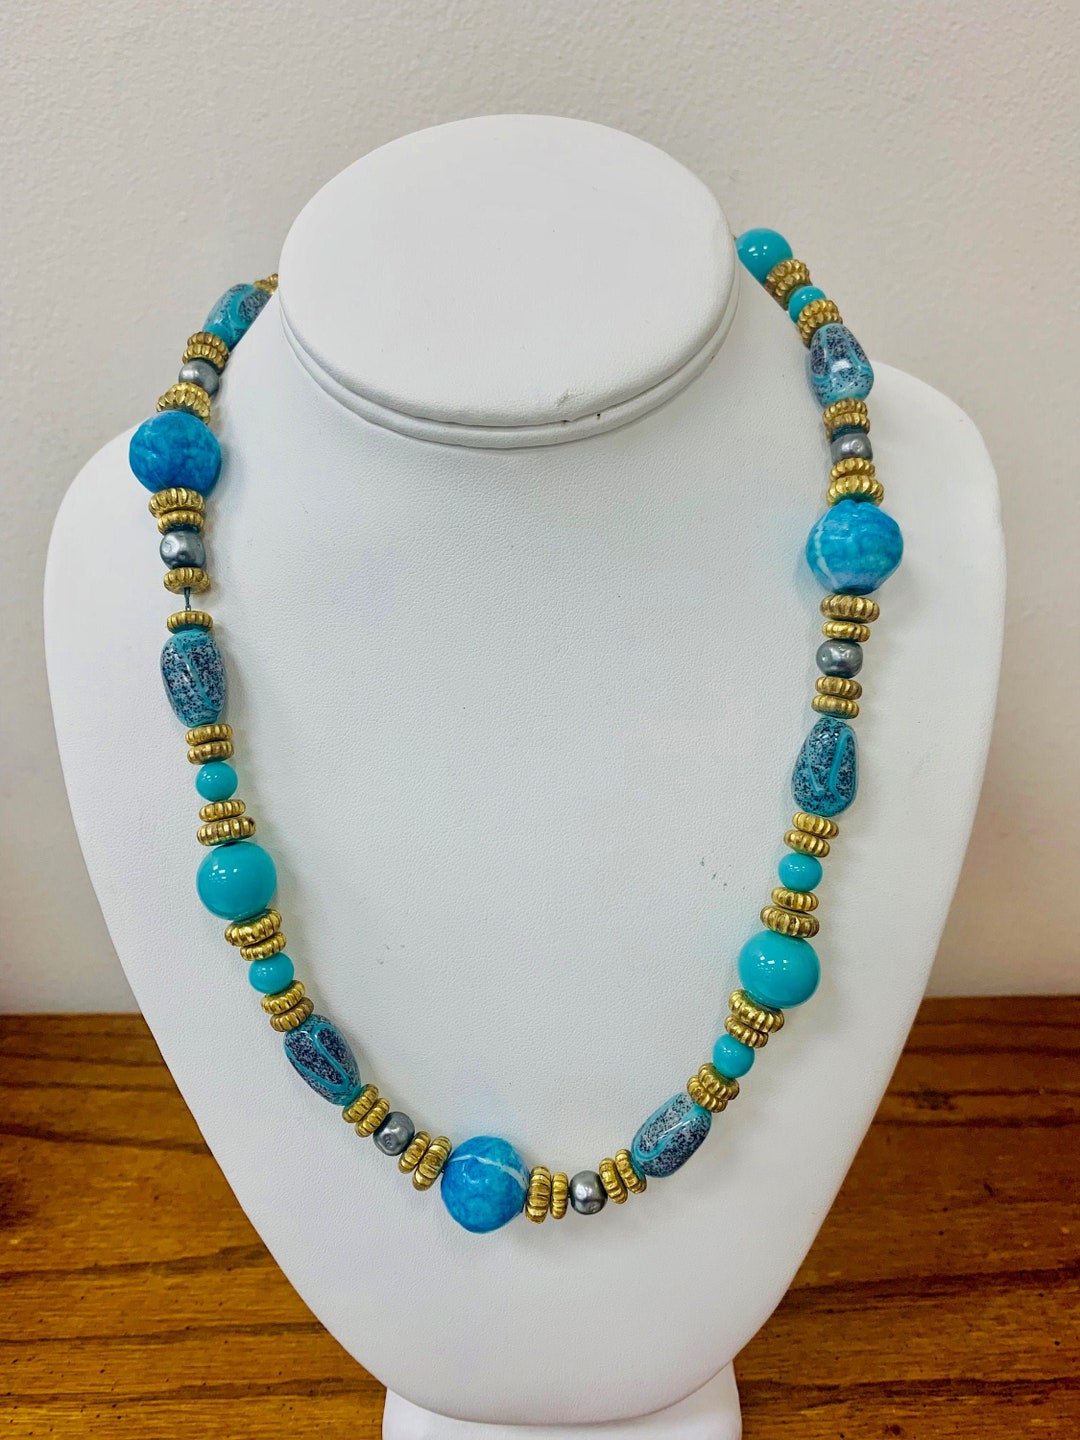 Vintage Blue and Gold Tone Beaded Mixed Media Necklace Item K - Etsy